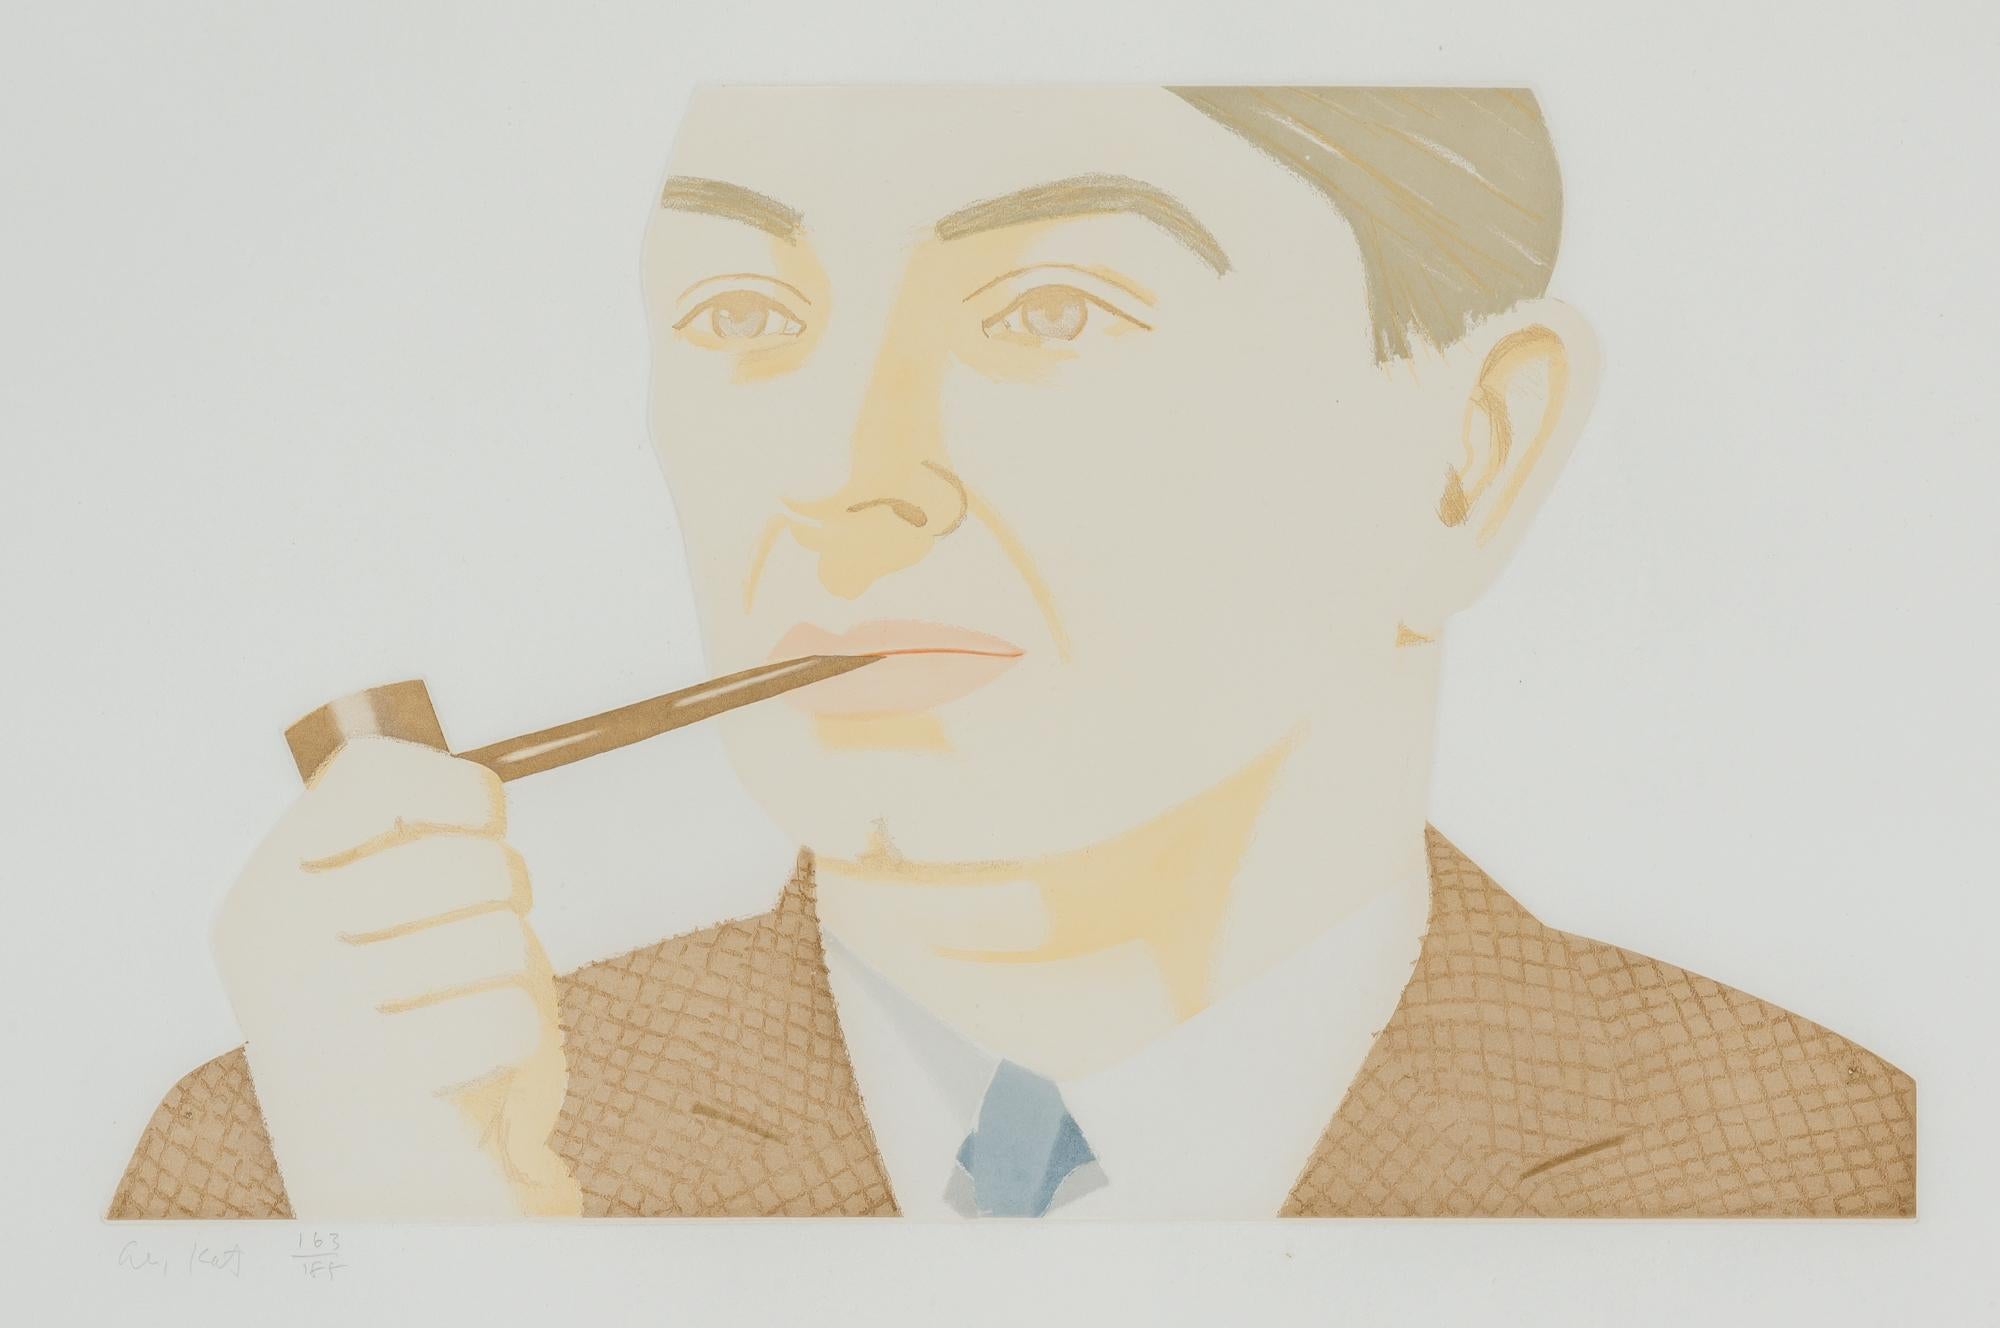 ALEX KATZ (1927-Present)

Alex Katz' 'Man with Pipe' is a color etching and aquatint, 1984, on Rives BFK paper, signed and numbered 163/185 in pencil, printed by Aldo Crommelynck, co-published by Aldo Crommelynck, Paris and The Brooklyn Museum, New